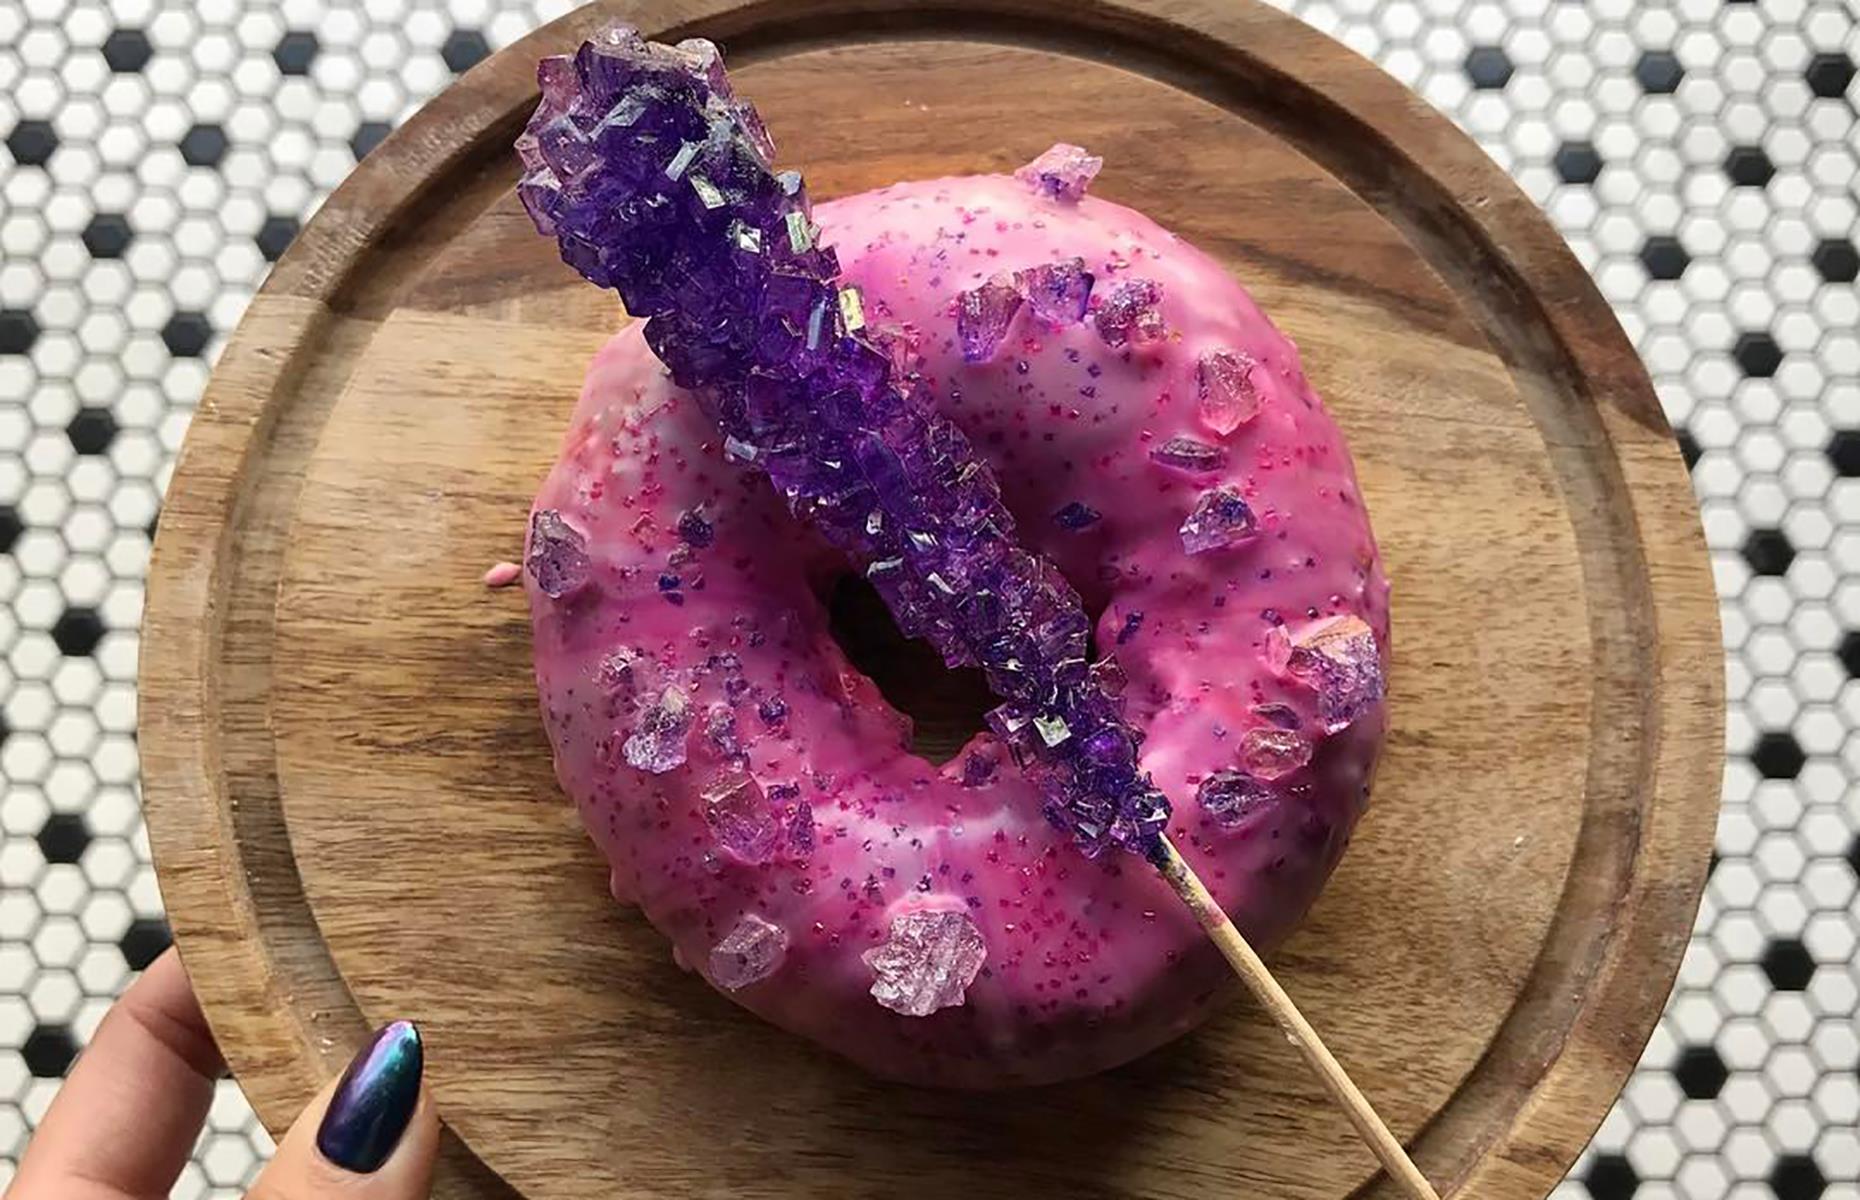 <p>In 2017, Los Angeles’ coffee, fried chicken and donut shop <a href="https://birdieschickensandwich.com/menu-donuts/">Birdies</a> launched this limited-edition (and wonderfully vibrant) Rock Candy Donut. Glazed in marbled pink frosting and decorated with an edible purple crystal, it looks almost too pretty to eat. Almost... Other colorful creations from Birdies include the star-sprinkled Galaxy and Pistachio Thyme, in an appealing Tiffany blue.</p>